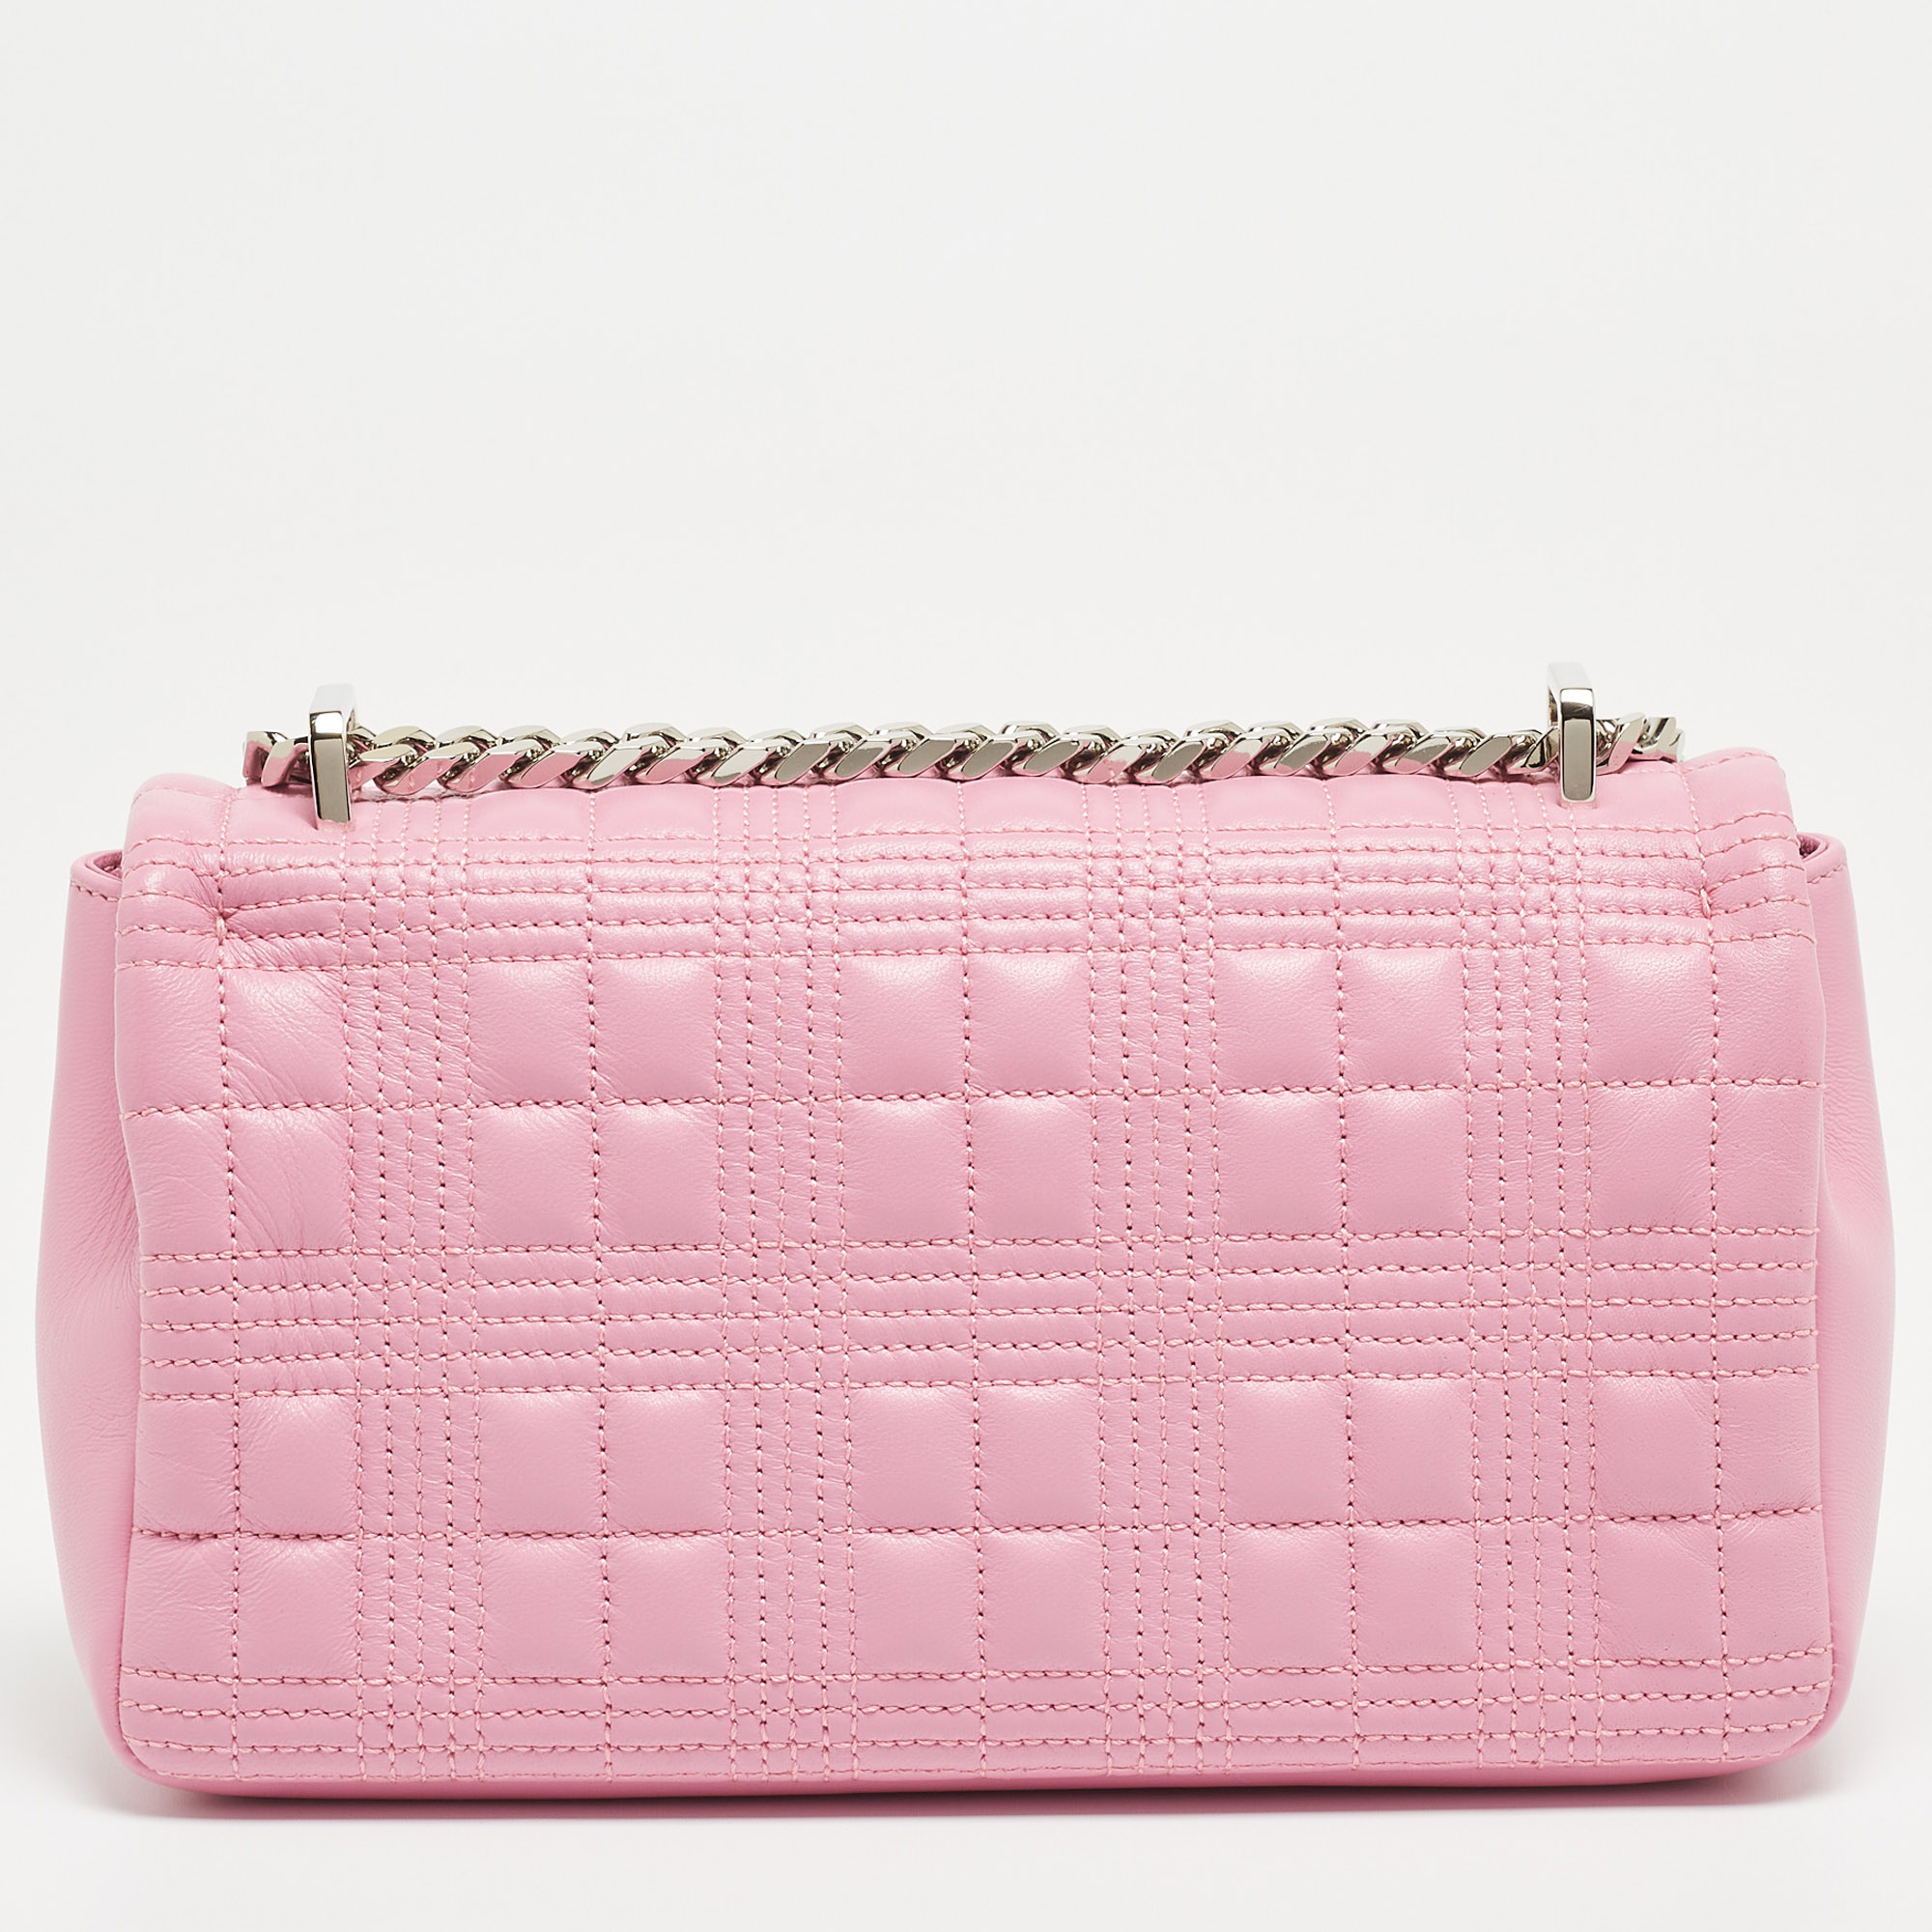 Burberry Light Pink Quilted Leather Small Lola Shoulder Bag